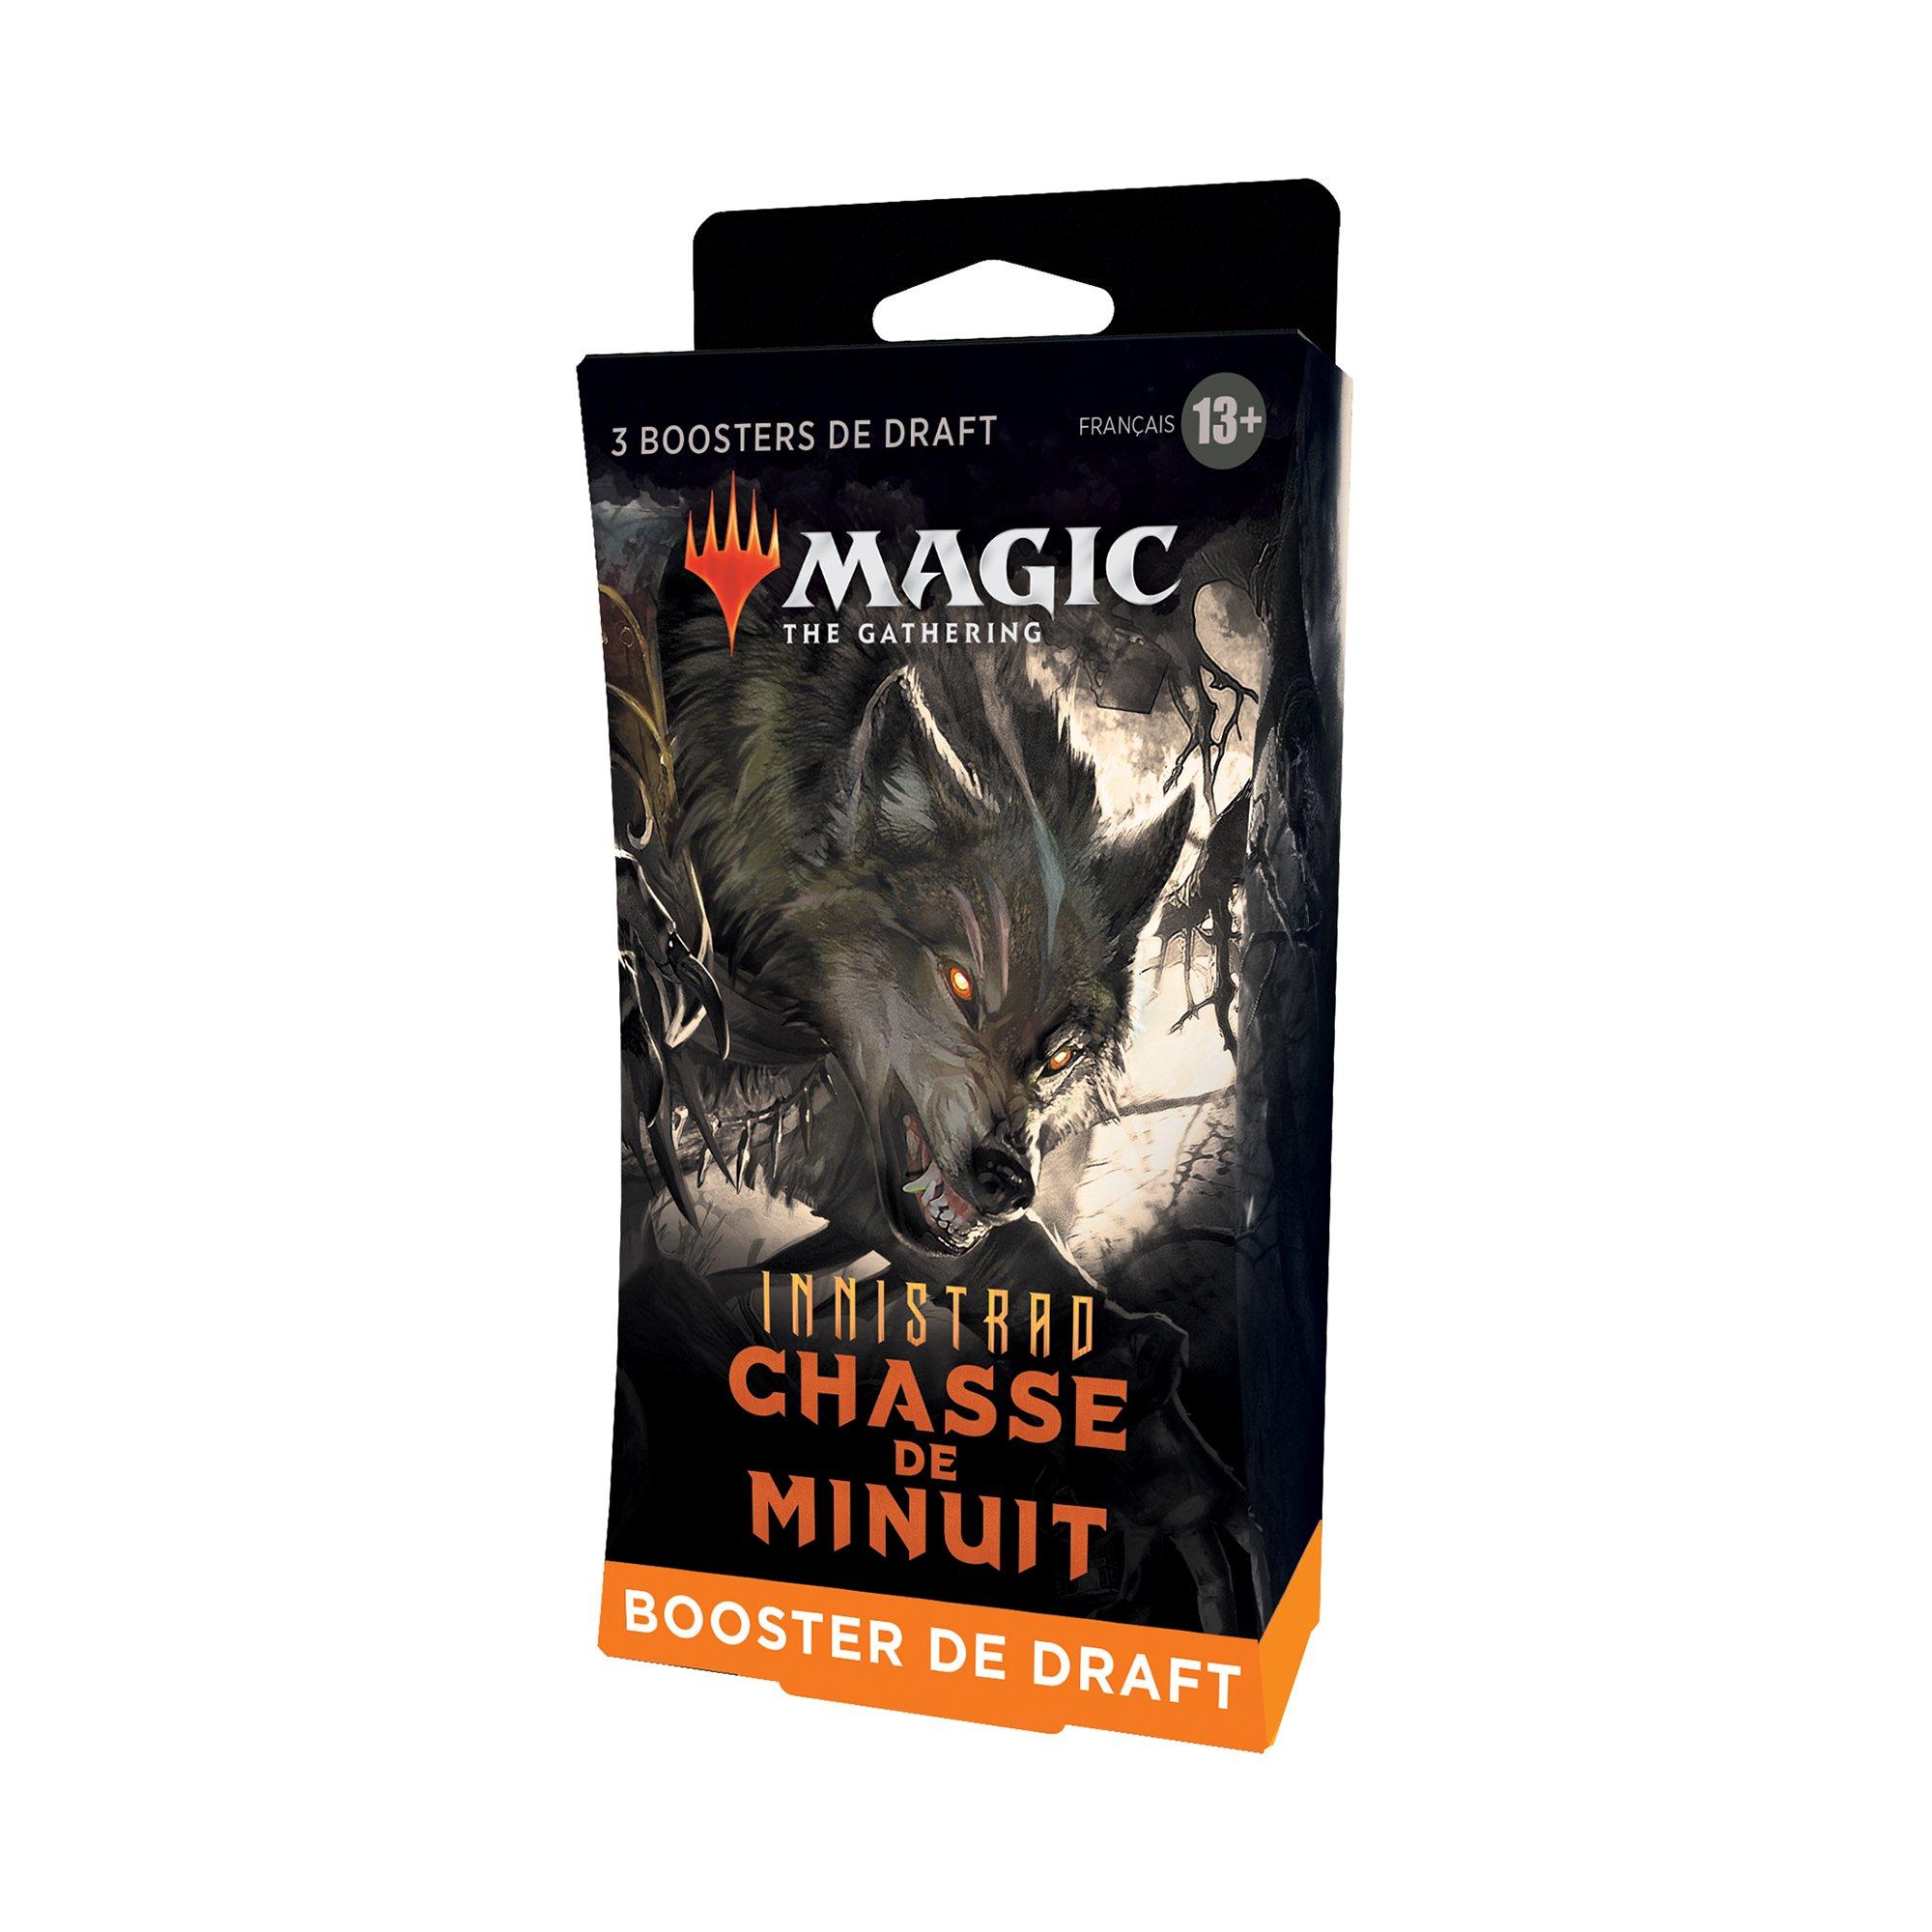 Image of Wyzards Magic the Gathering Booster Chasse de Minuit, Französisch